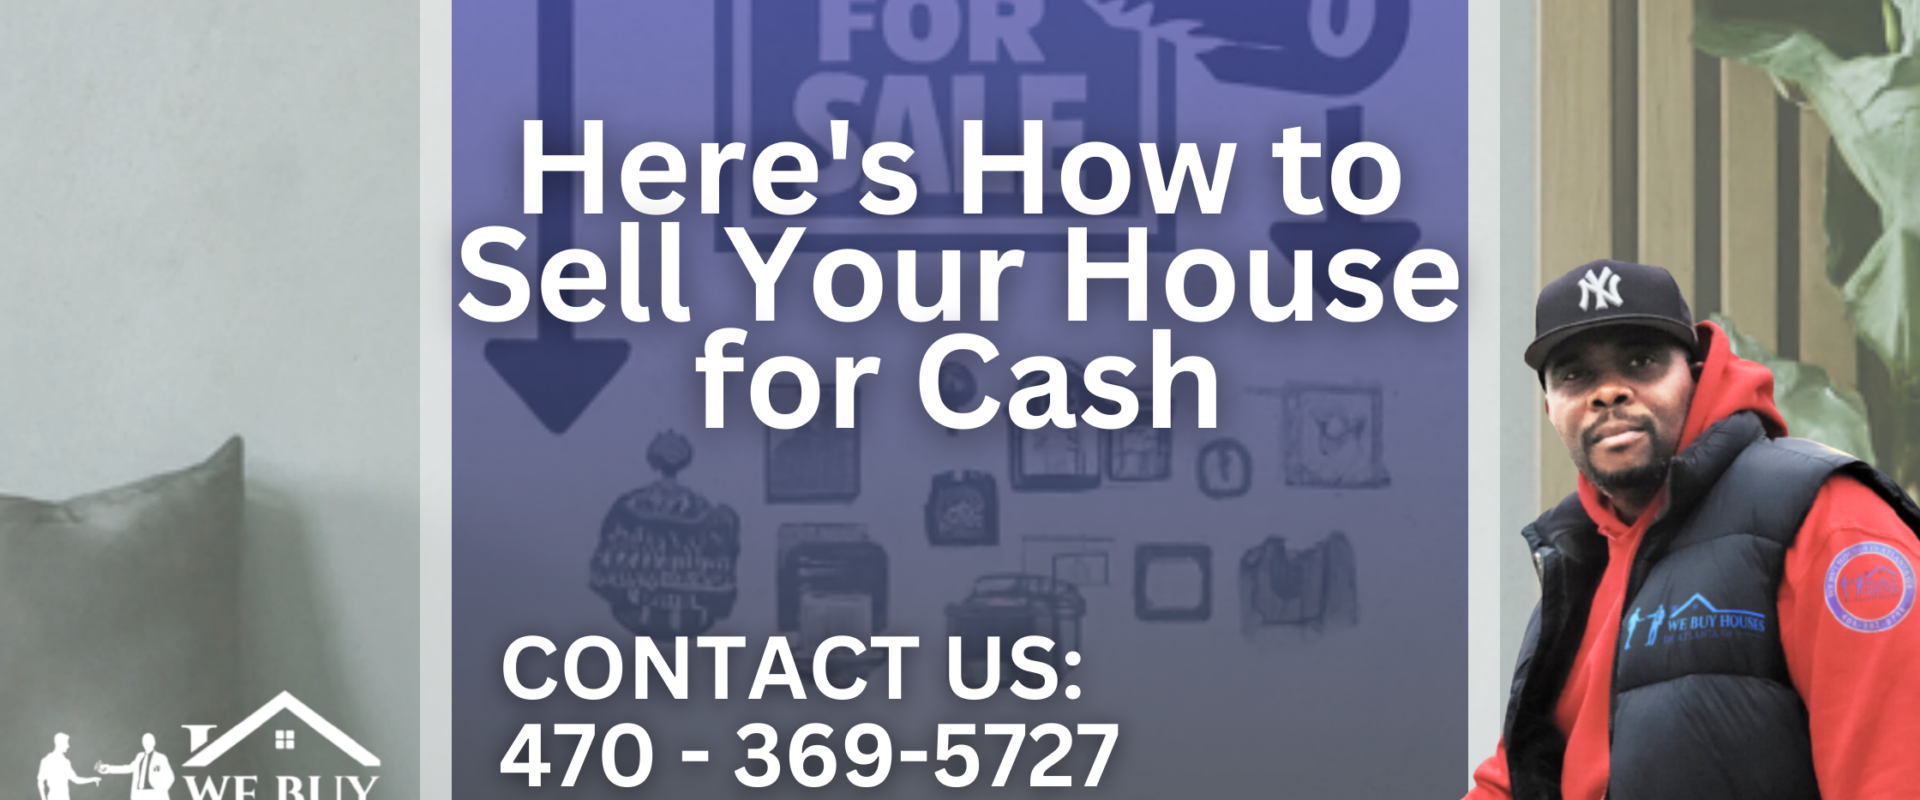 Here's How to Sell Your House for Cash